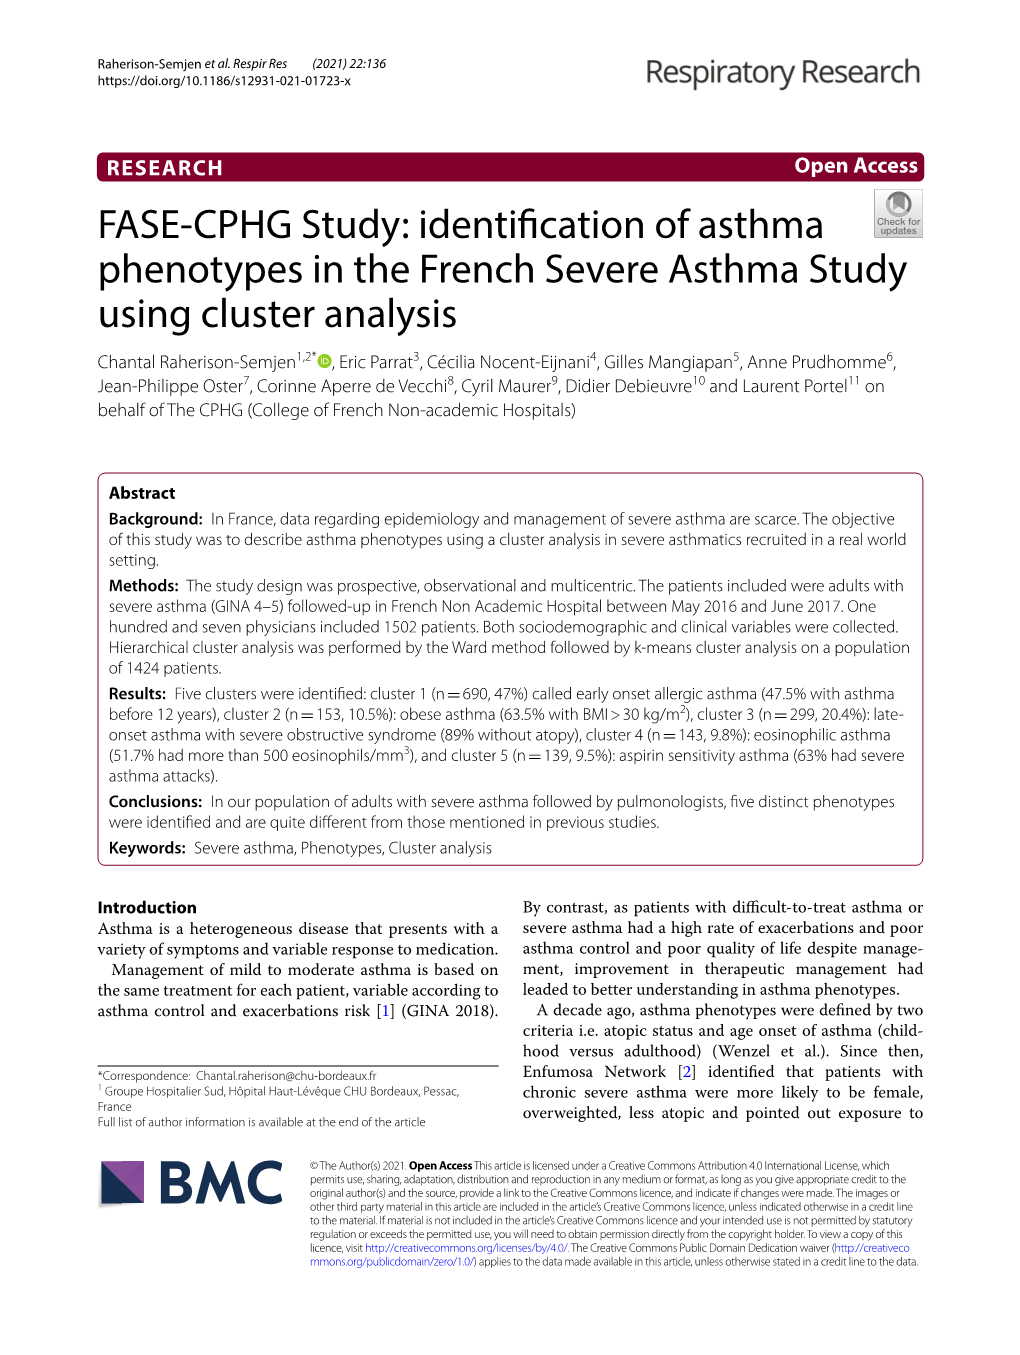 FASE-CPHG Study: Identification of Asthma Phenotypes in the French